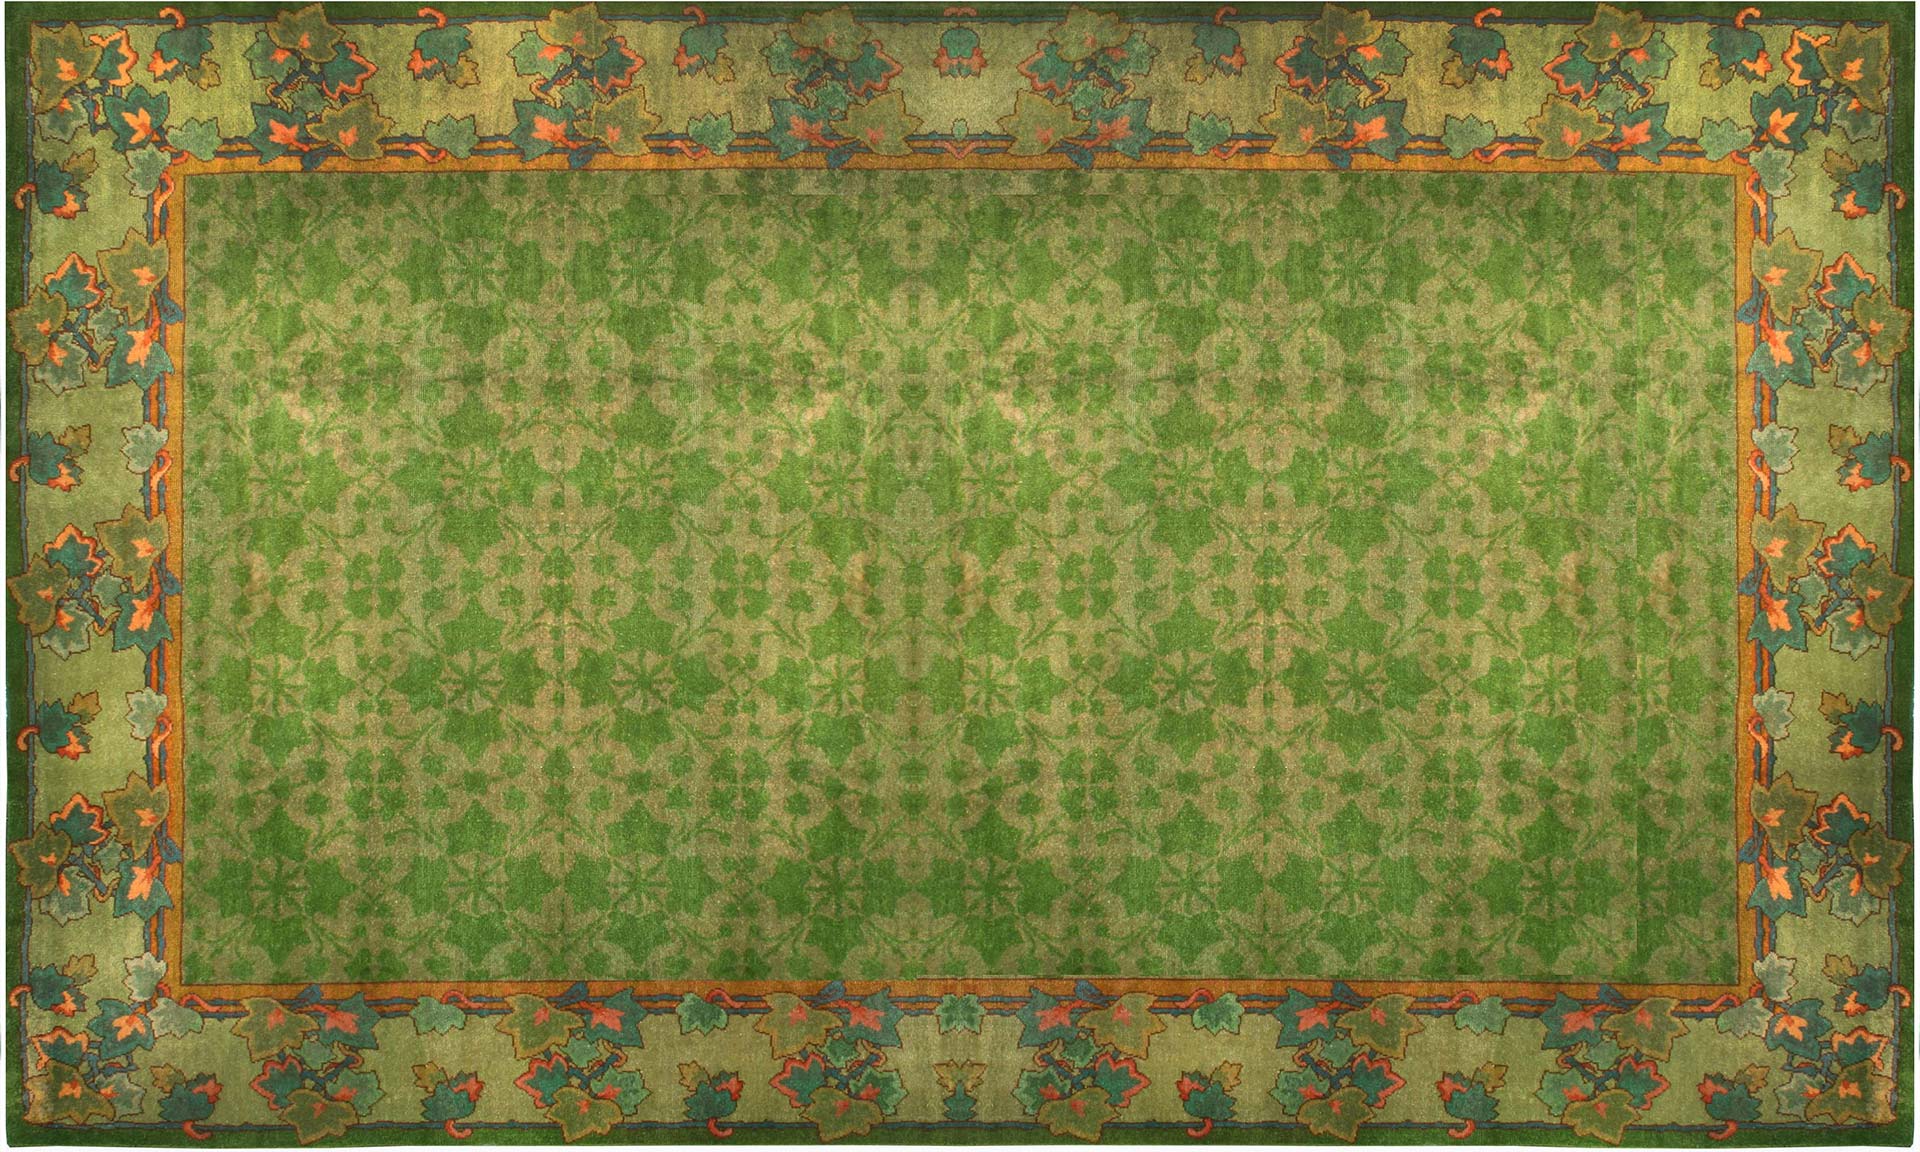 A shamrock-colored Irish Donegal area rug in the Doris Leslie Blau Collection. Circa 1880’s, Ireland. Rug size: 13’4” x 21’5”